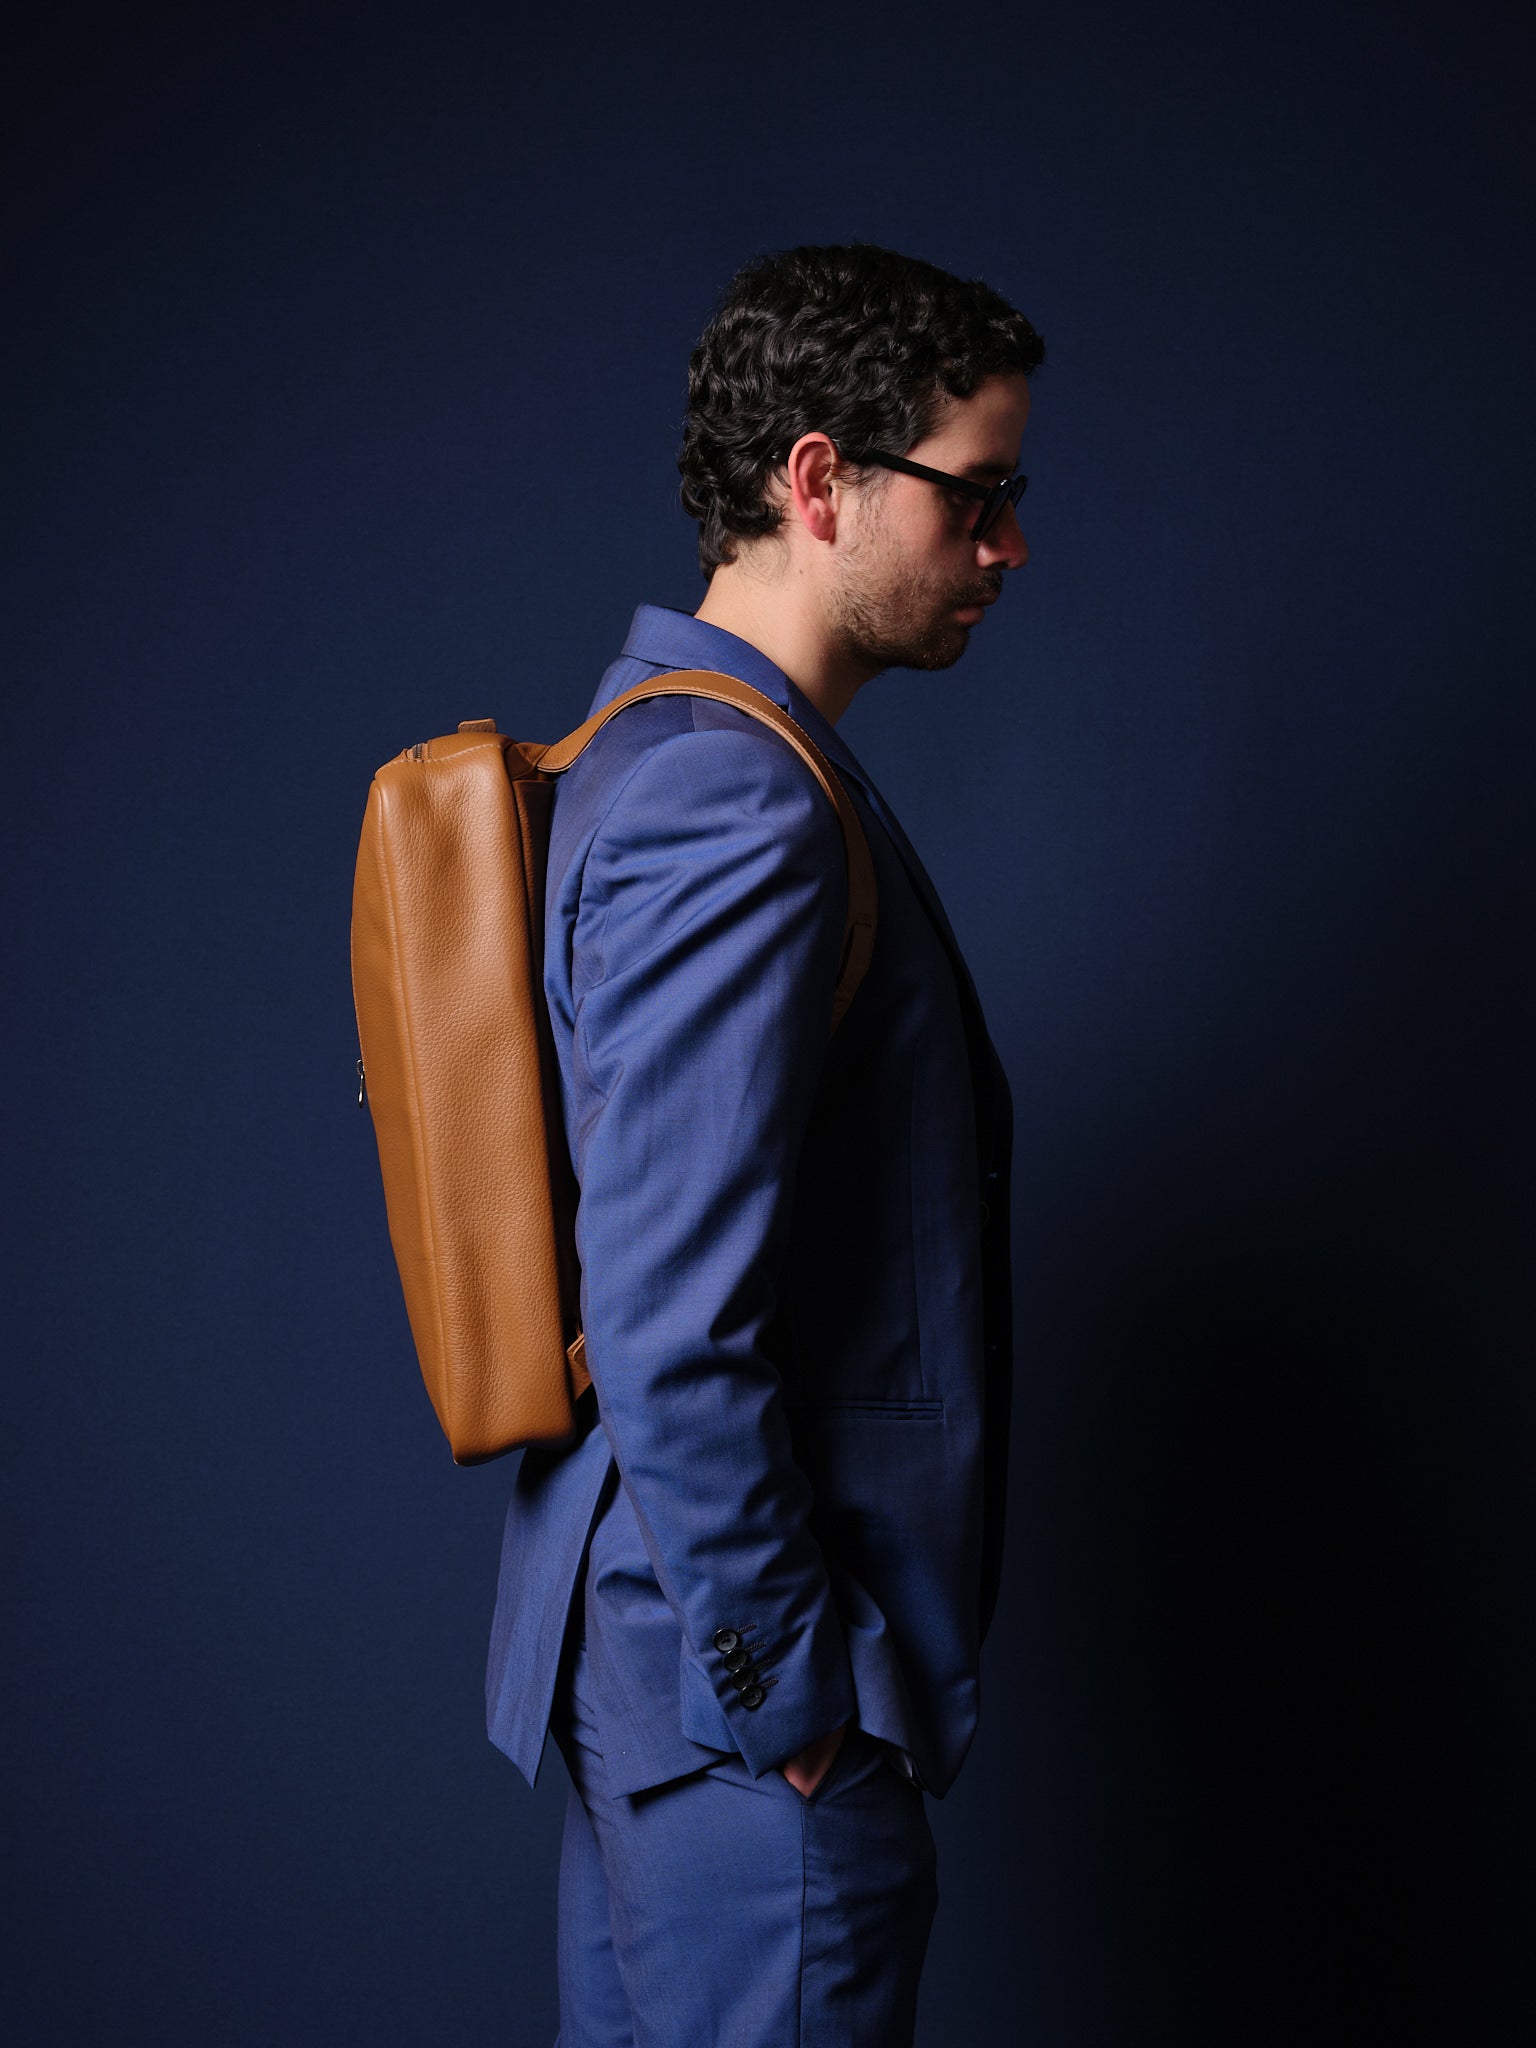 Best Convertible Briefcase Backpack. Full-grain Leather Briefcase Backpack Tan by Capra